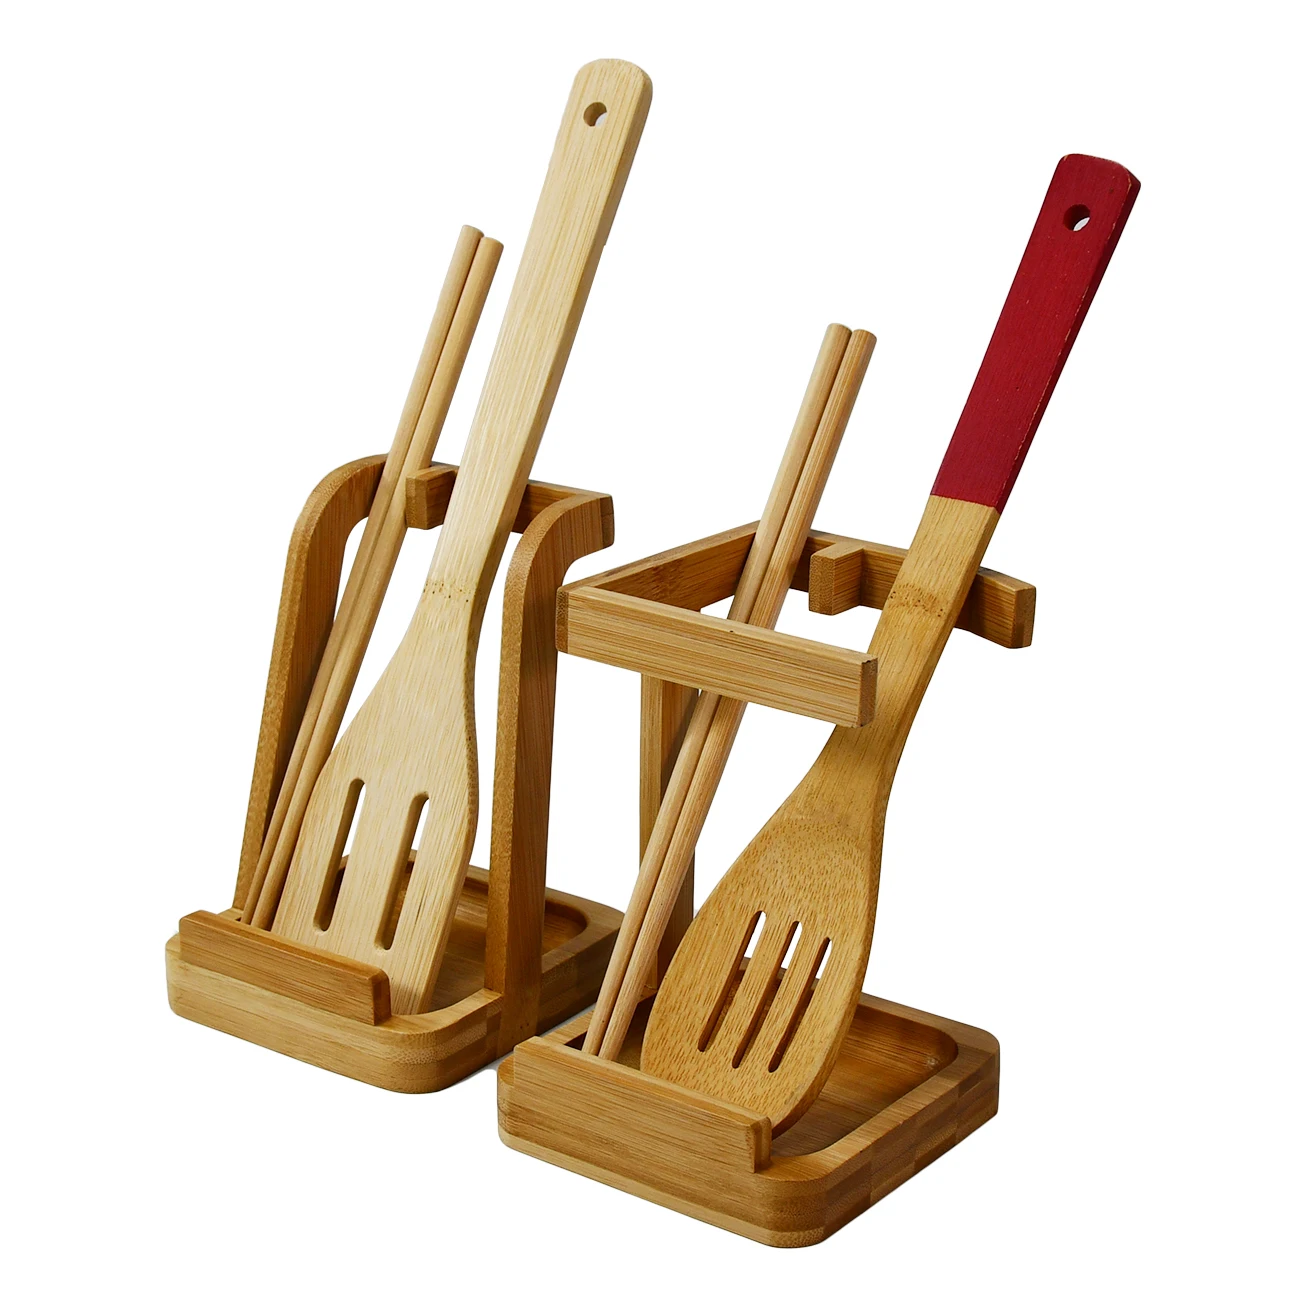 Wholesale Bamboo Wood Spoon Utensil Rest Rack Adjustable Pan and Pot lid Organizer Holder Kitchen